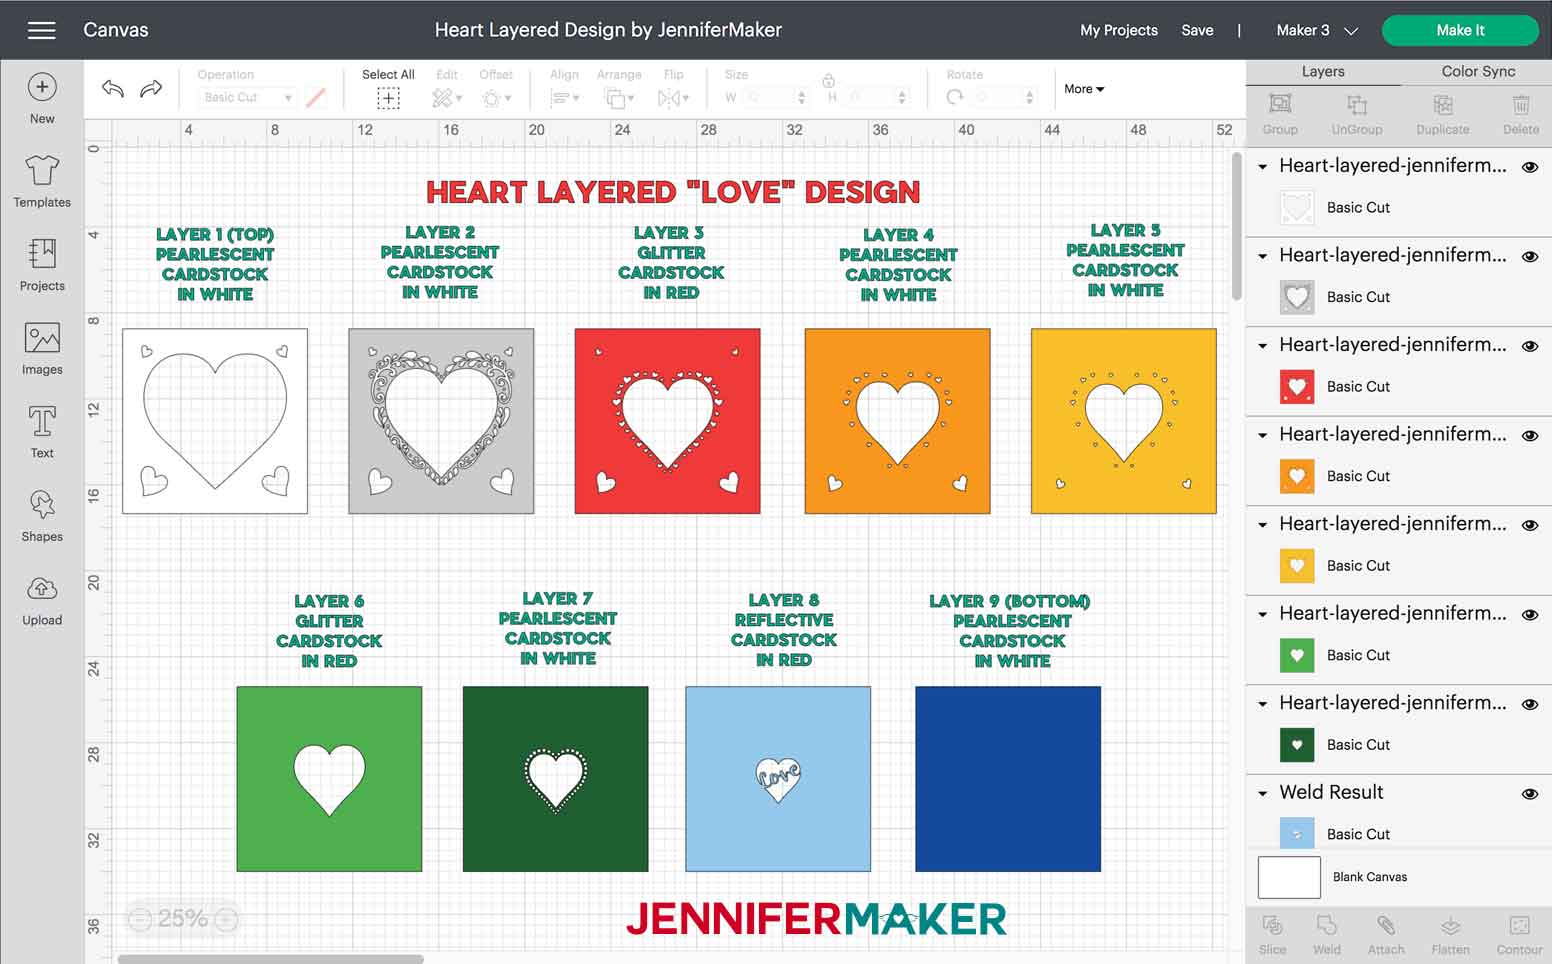 Layer order and materials used to cut custom "Love" heart layered SVG (Kelly to make)